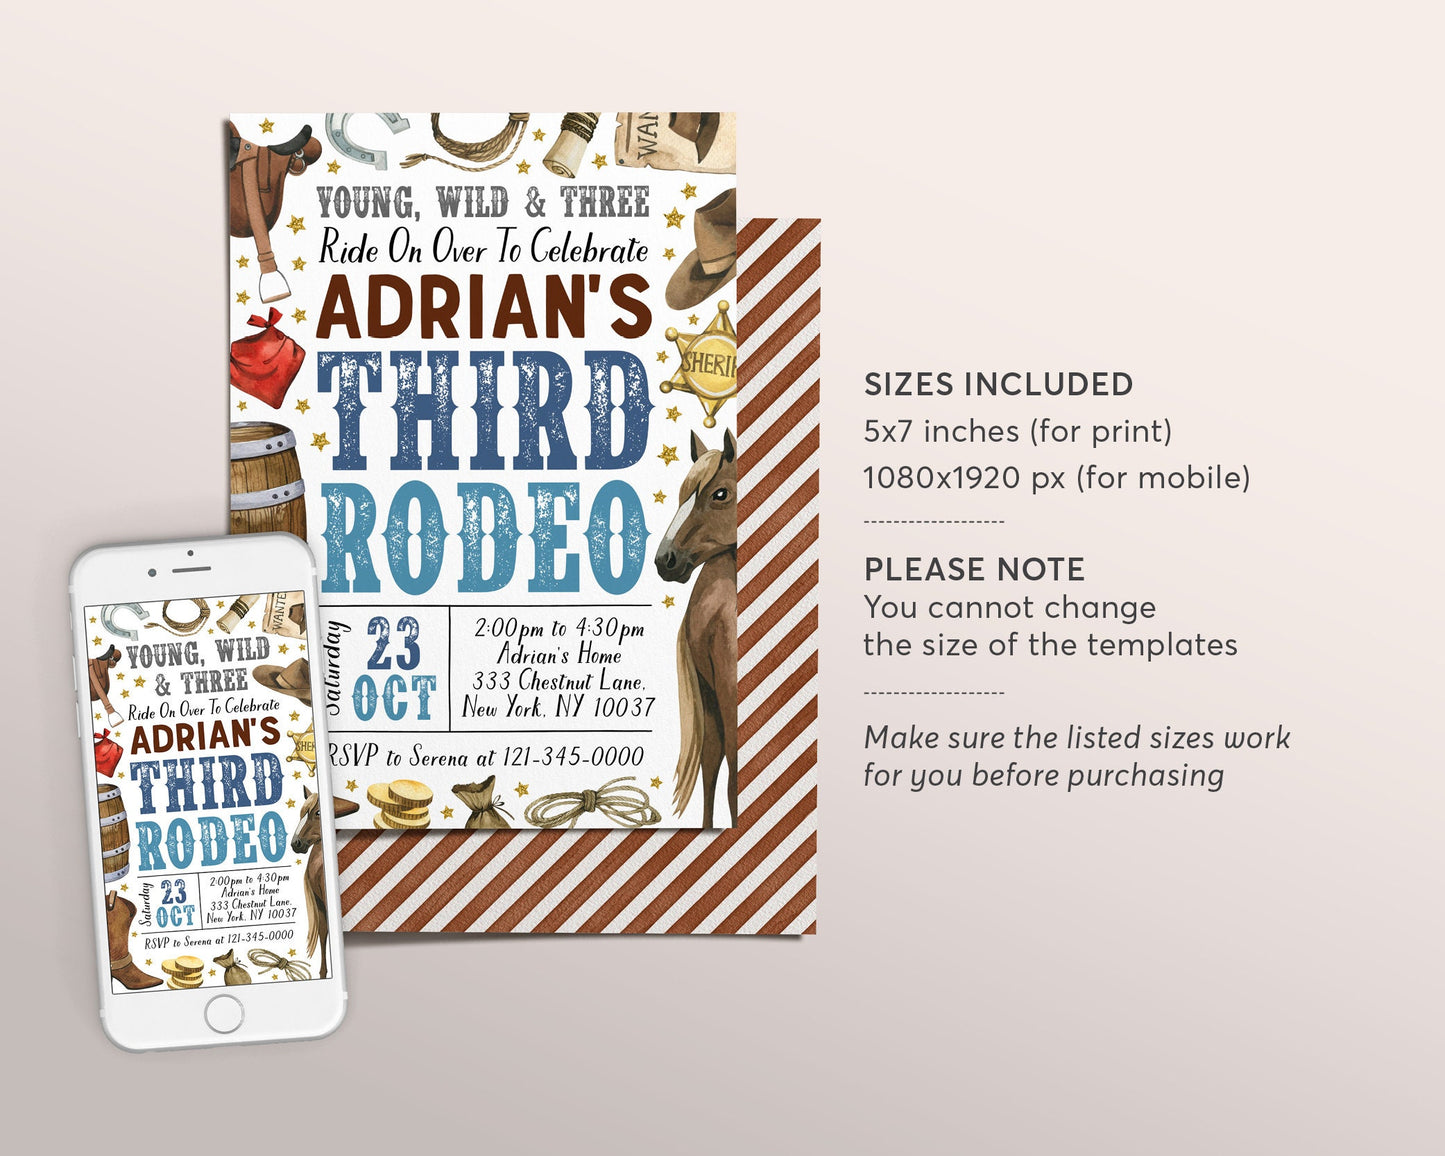 Third Rodeo Birthday Invitation Editable Template, Cowboy Young Wild And Three Wild West Party Invite, Ranch Southwestern Western Evite